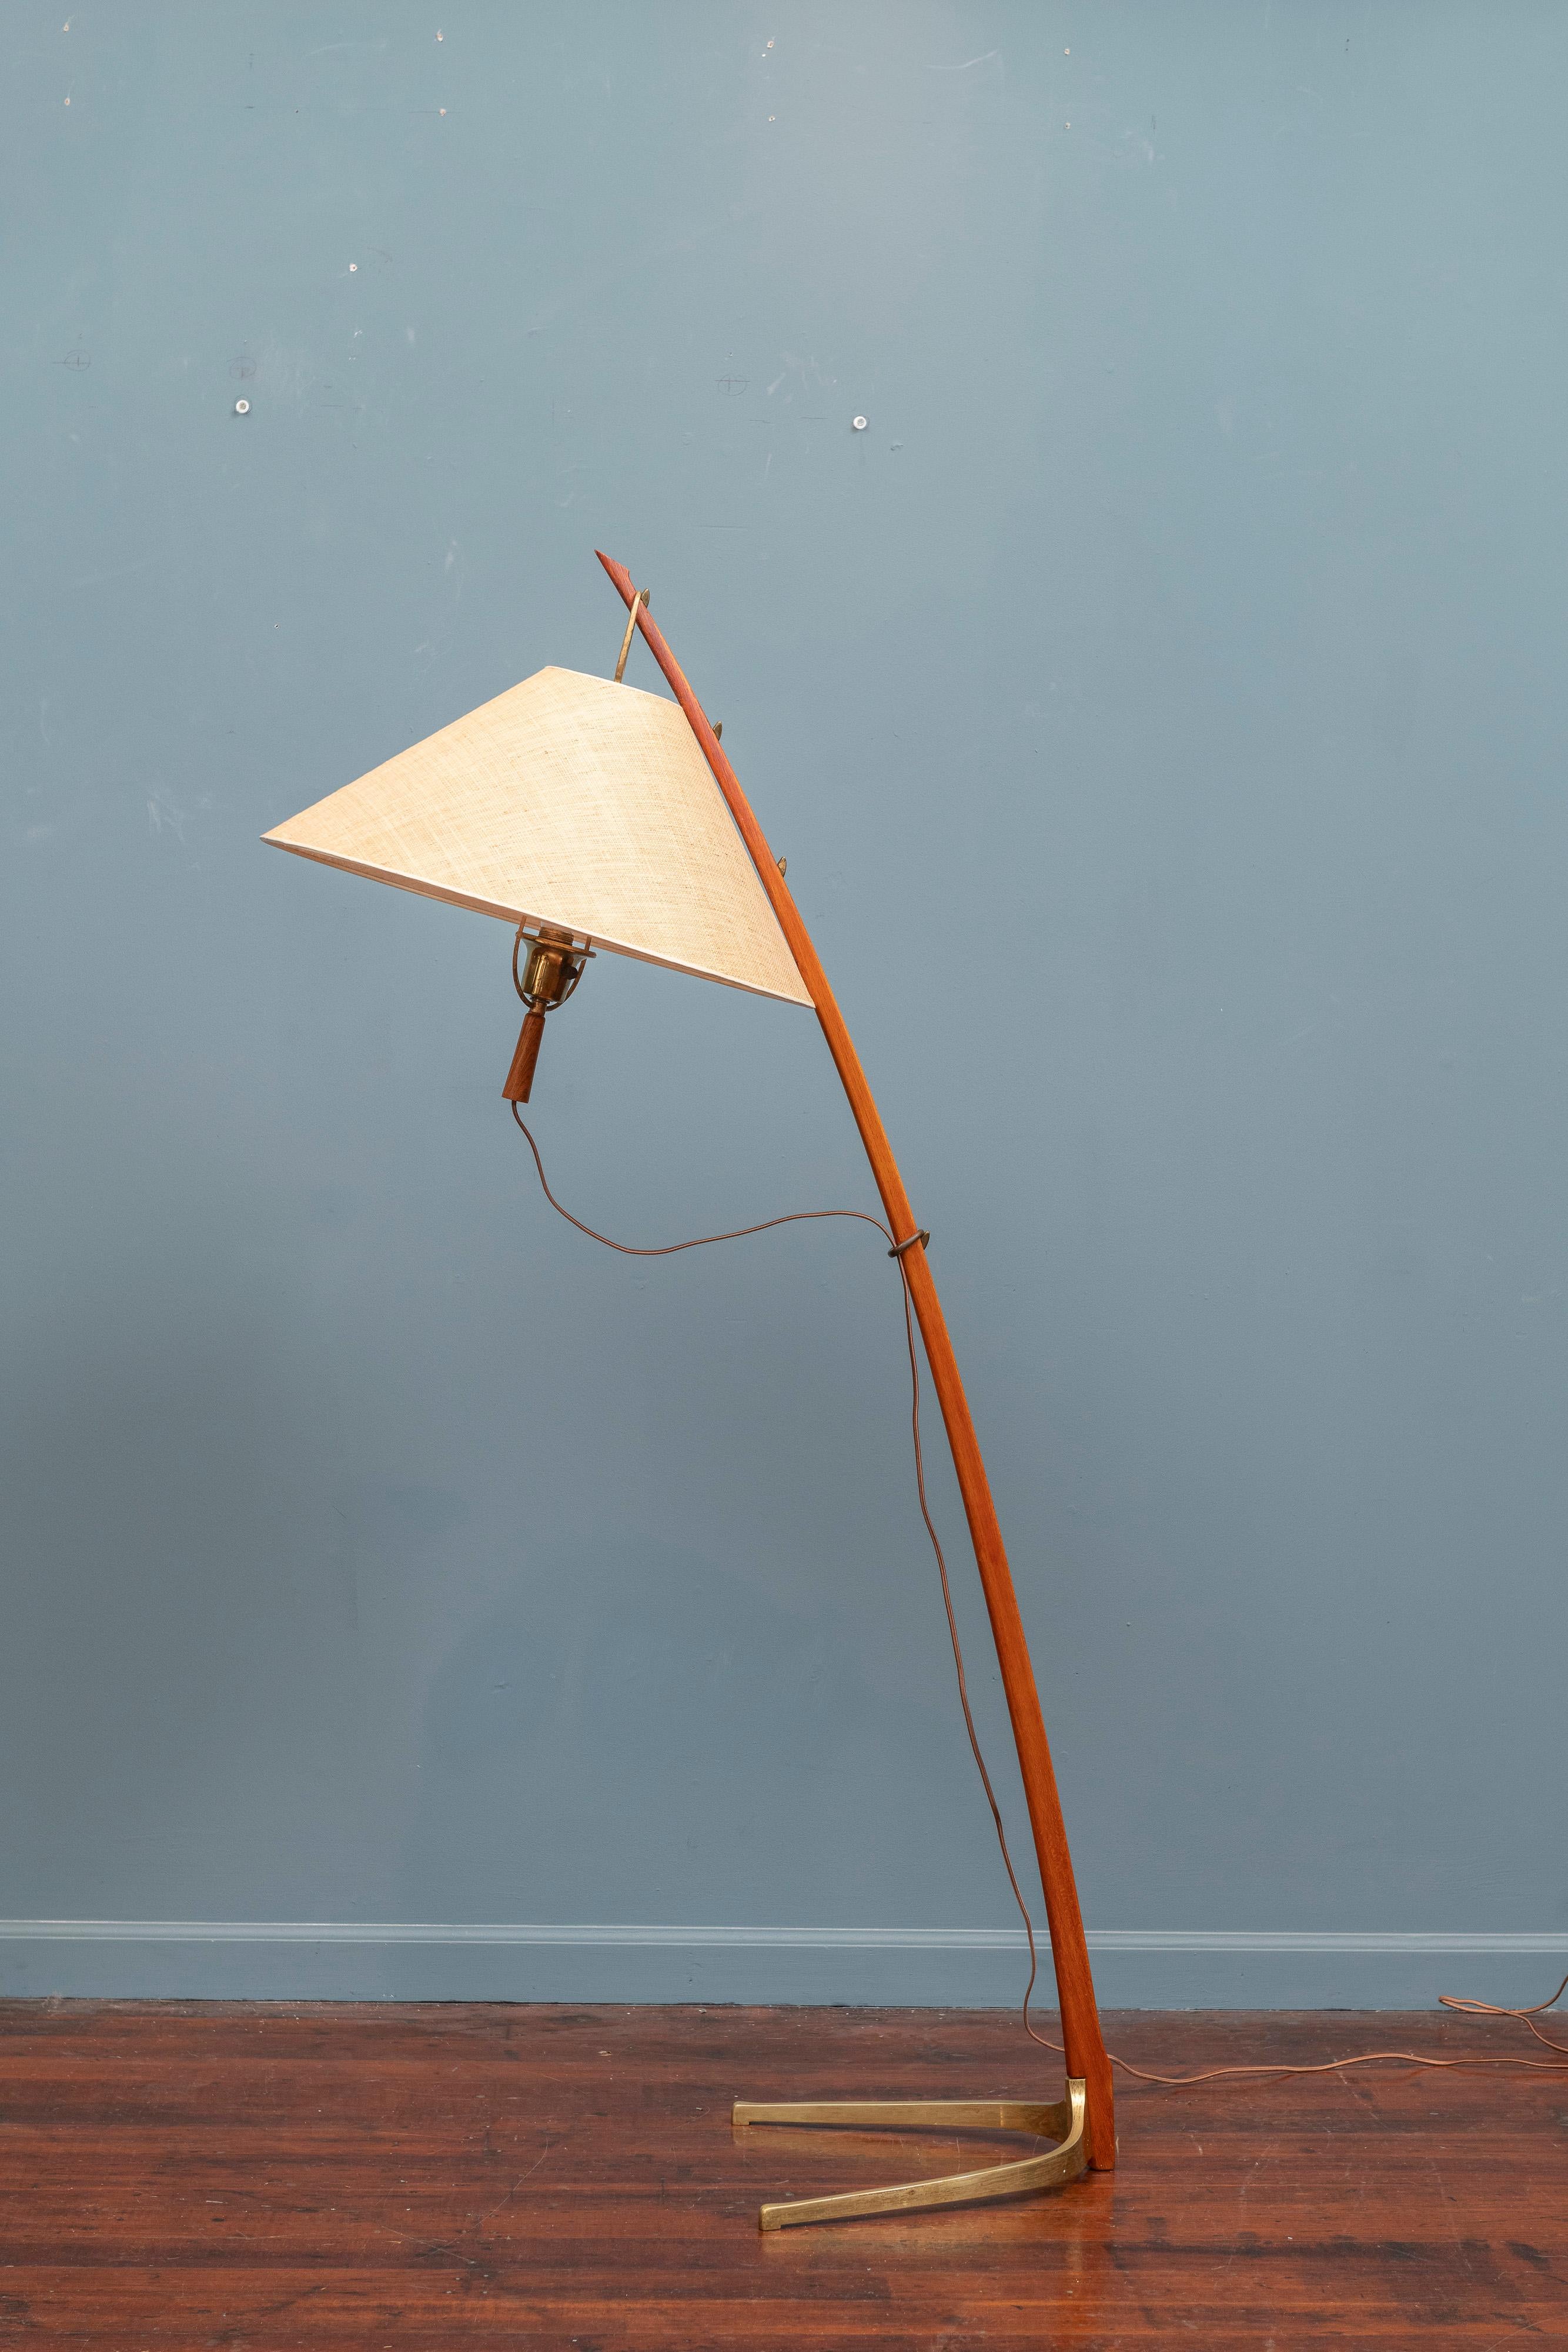 A beautiful Dornstab (‘thorn stick’) floor lamp, designed in 1947 by J.T. Kalmar. It is made out of a wooden, saber shaped stem with a curved brass base and fabric shade.
The height of the shade is adjustable to three different positions on the